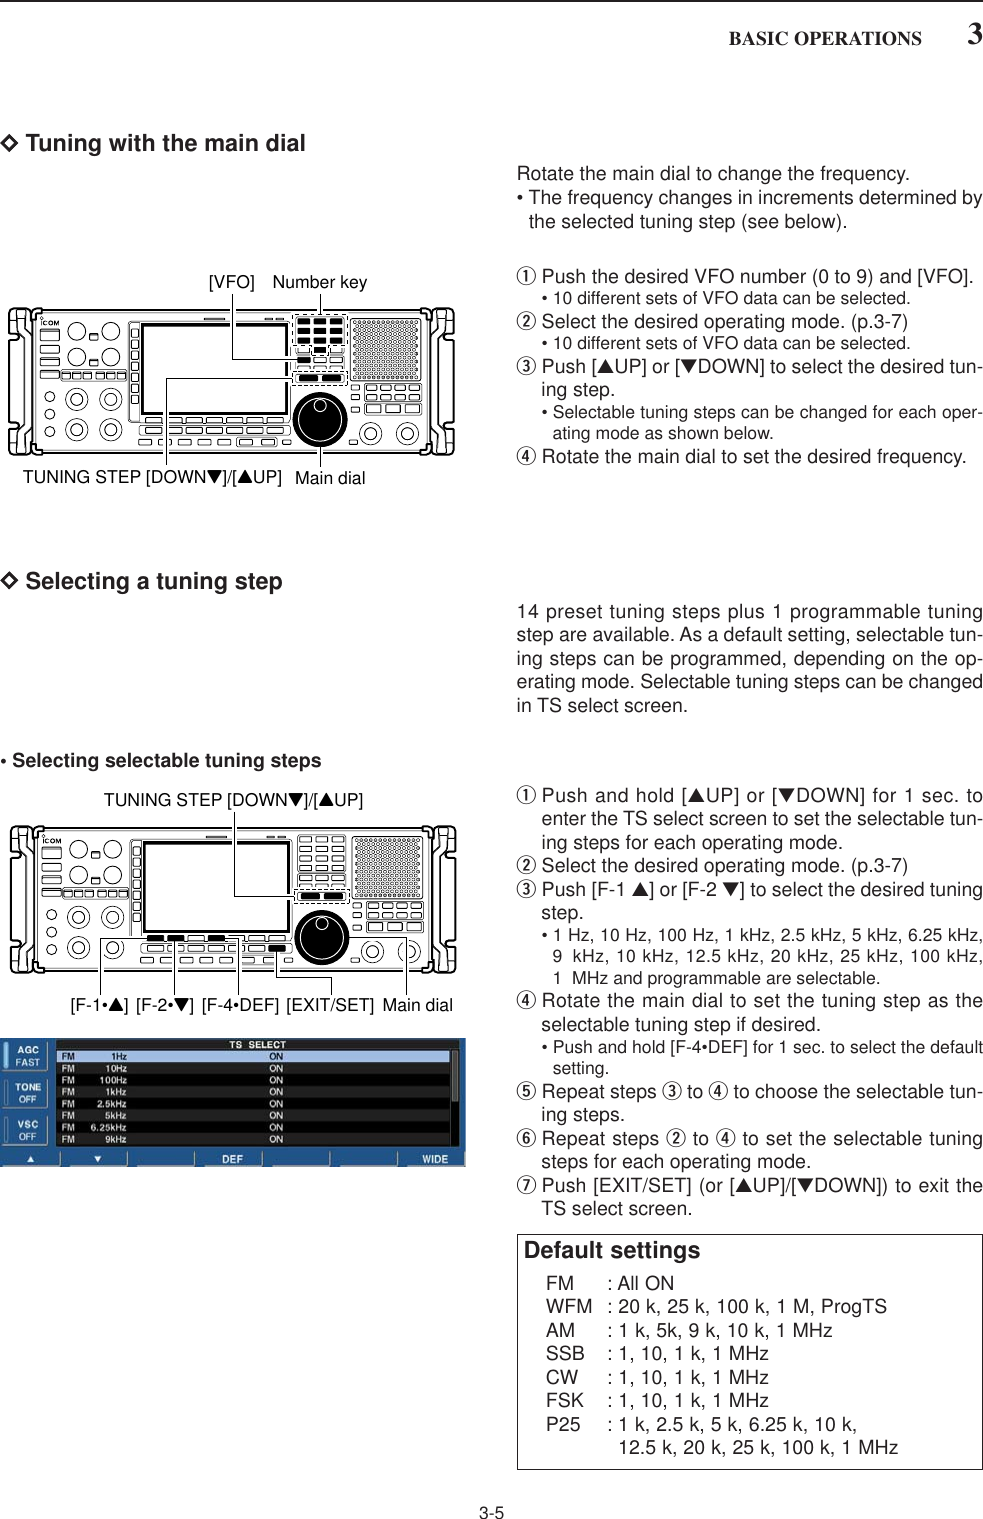 3-53BASIC OPERATIONSDTuning with the main dialRotate the main dial to change the frequency.• The frequency changes in increments determined bythe selected tuning step (see below).qPush the desired VFO number (0 to 9) and [VFO].• 10 different sets of VFO data can be selected.wSelect the desired operating mode. (p.3-7)• 10 different sets of VFO data can be selected.ePush [▲UP] or [▼DOWN] to select the desired tun-ing step.• Selectable tuning steps can be changed for each oper-ating mode as shown below.rRotate the main dial to set the desired frequency.DSelecting a tuning step14 preset tuning steps plus 1 programmable tuningstep are available. As a default setting, selectable tun-ing steps can be programmed, depending on the op-erating mode. Selectable tuning steps can be changedin TS select screen.• Selecting selectable tuning stepsqPush and hold [▲UP] or [▼DOWN] for 1 sec. toenter the TS select screen to set the selectable tun-ing steps for each operating mode.wSelect the desired operating mode. (p.3-7)ePush [F-1 ▲] or [F-2 ▼] to select the desired tuningstep.•1 Hz, 10 Hz, 100 Hz, 1 kHz, 2.5 kHz, 5 kHz, 6.25 kHz,9 kHz, 10 kHz, 12.5 kHz, 20 kHz, 25 kHz, 100 kHz,1 MHz and programmable are selectable.rRotate the main dial to set the tuning step as theselectable tuning step if desired.• Push and hold [F-4•DEF] for 1 sec. to select the defaultsetting.tRepeat steps eto rto choose the selectable tun-ing steps.yRepeat steps wto rto set the selectable tuningsteps for each operating mode.uPush [EXIT/SET] (or [▲UP]/[▼DOWN]) to exit theTS select screen.[F-1•Y] [F-2•Z] [F-4•DEF] [EXIT/SET] Main dialTUNING STEP [DOWNZ]/[YUP]Number key[VFO]Main dialTUNING STEP [DOWNZ]/[YUP]Default settingsFM : All ONWFM : 20 k, 25 k, 100 k, 1 M, ProgTSAM : 1 k, 5k, 9 k, 10 k, 1 MHzSSB : 1, 10, 1 k, 1 MHzCW : 1, 10, 1 k, 1 MHzFSK : 1, 10, 1 k, 1 MHzP25 : 1 k, 2.5 k, 5 k, 6.25 k, 10 k, 12.5 k, 20 k, 25 k, 100 k, 1 MHz